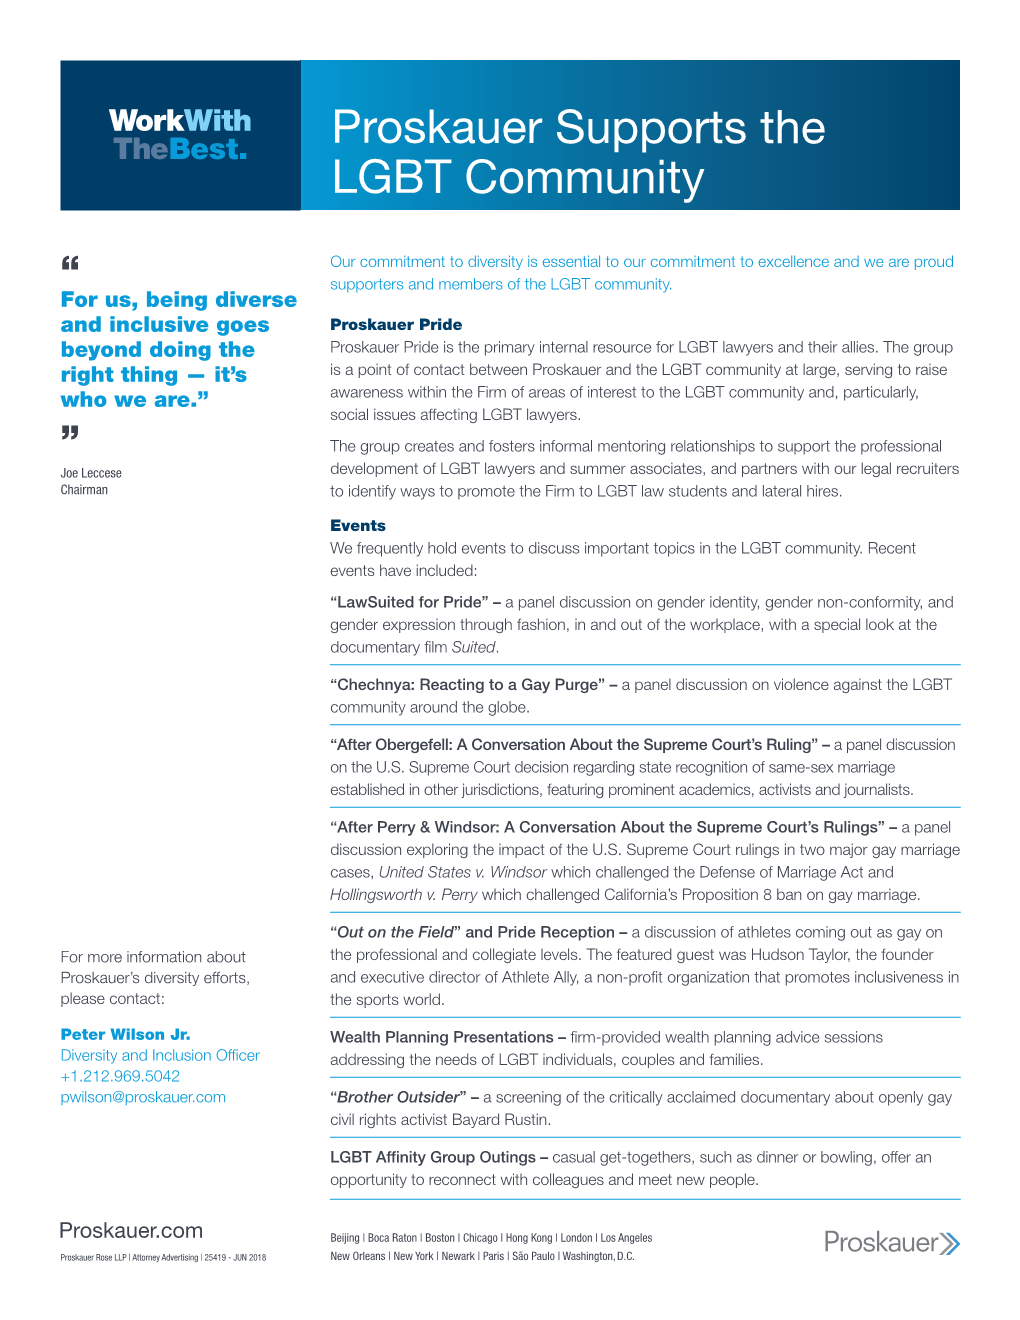 Proskauer Supports the LGBT Community